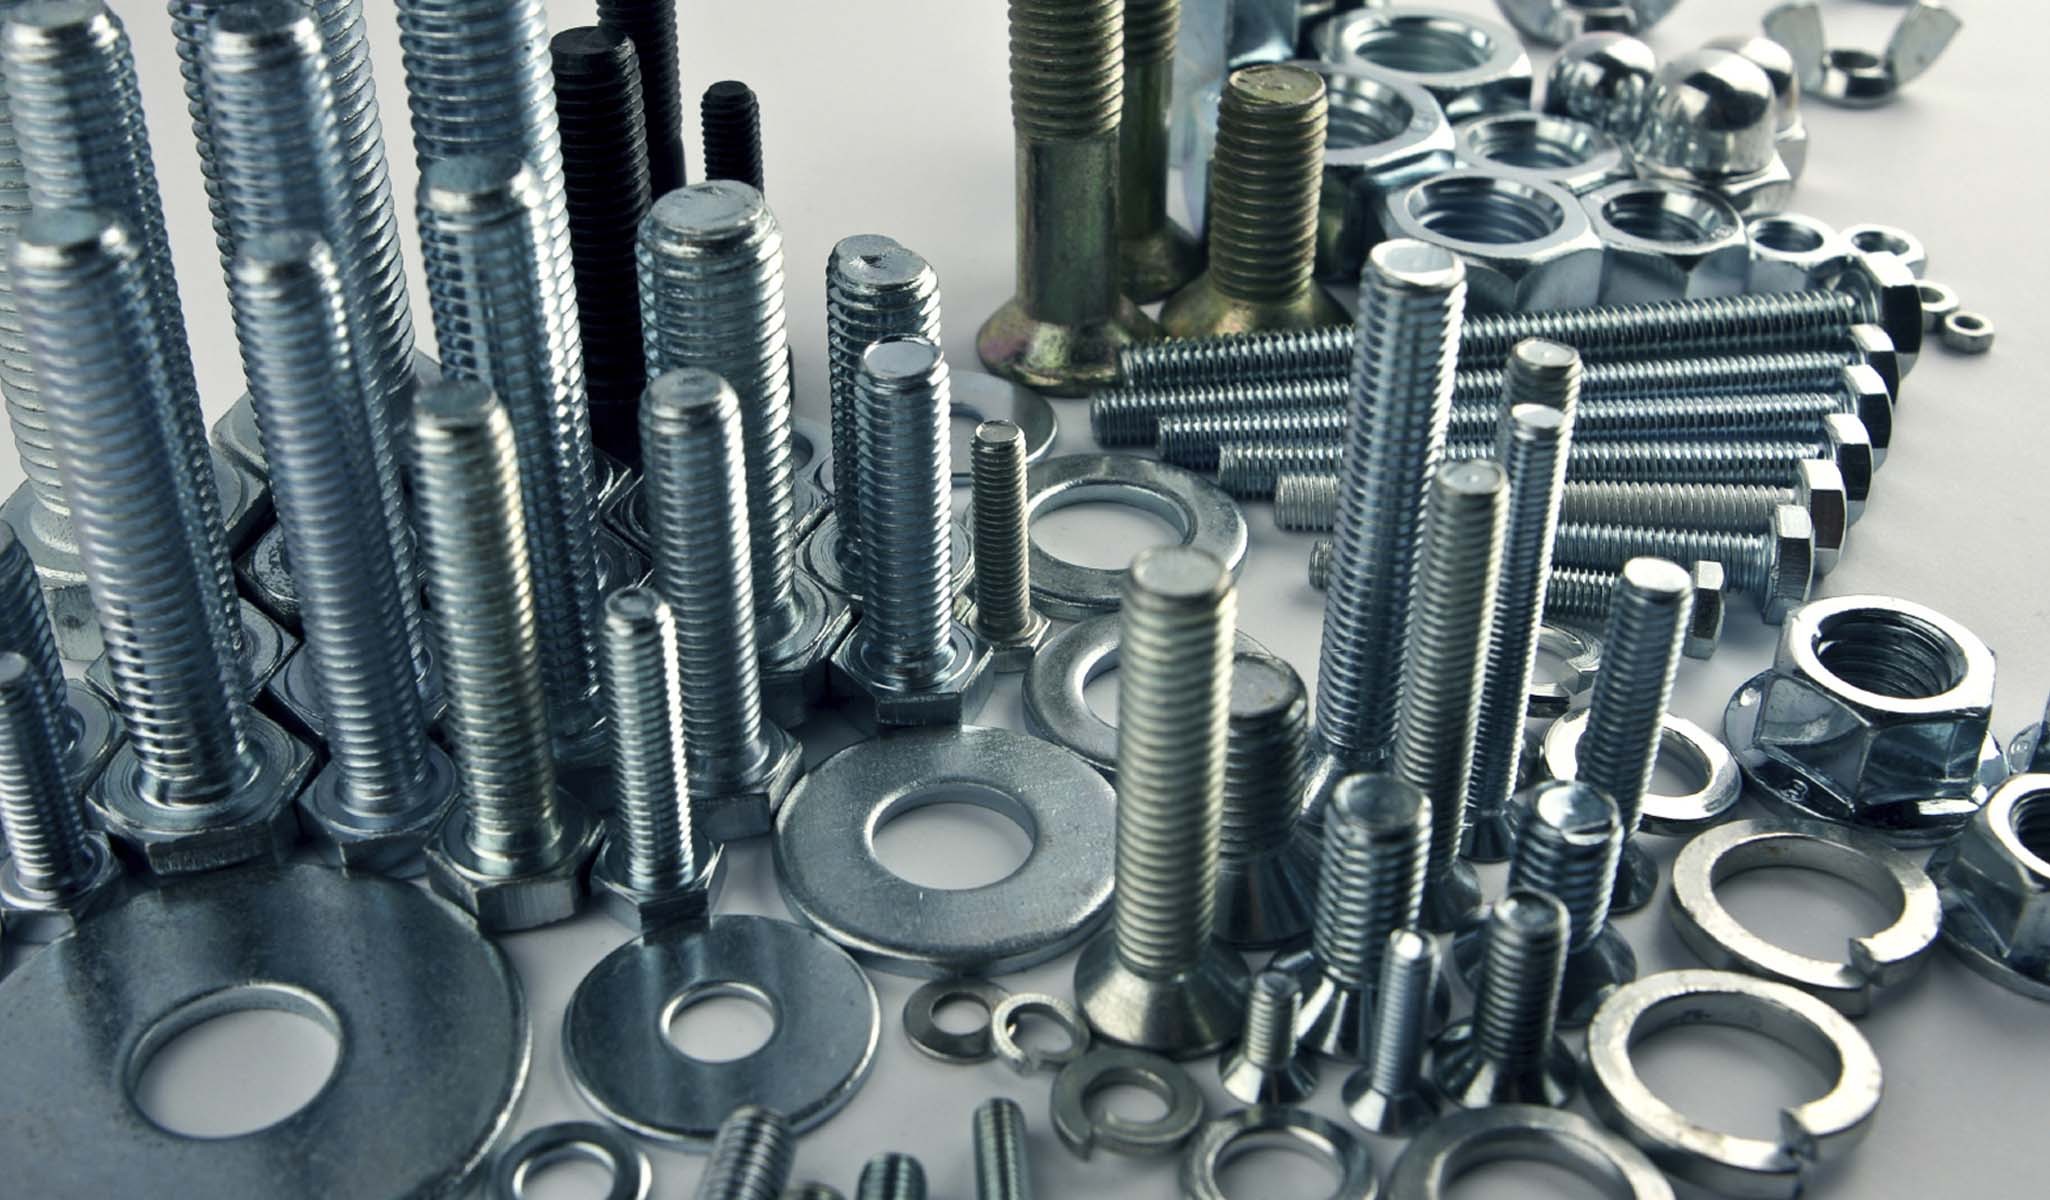 Where To Buy Fasteners Online from Suppliers